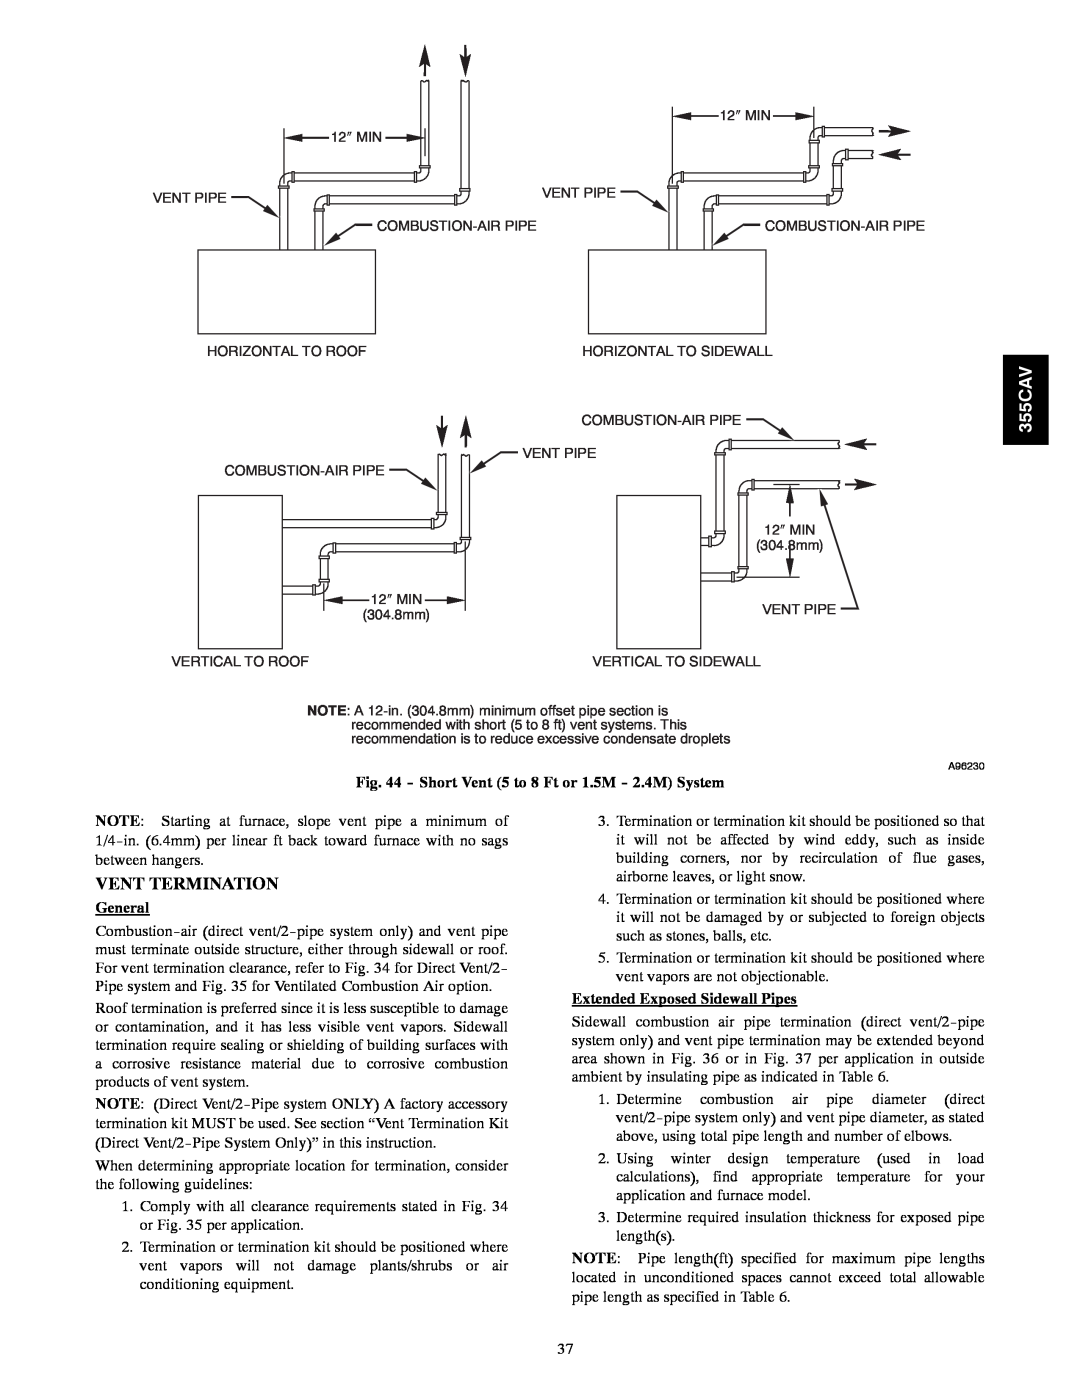 Bryant 355CAV installation instructions Vent Termination, Extended Exposed Sidewall Pipes, General 